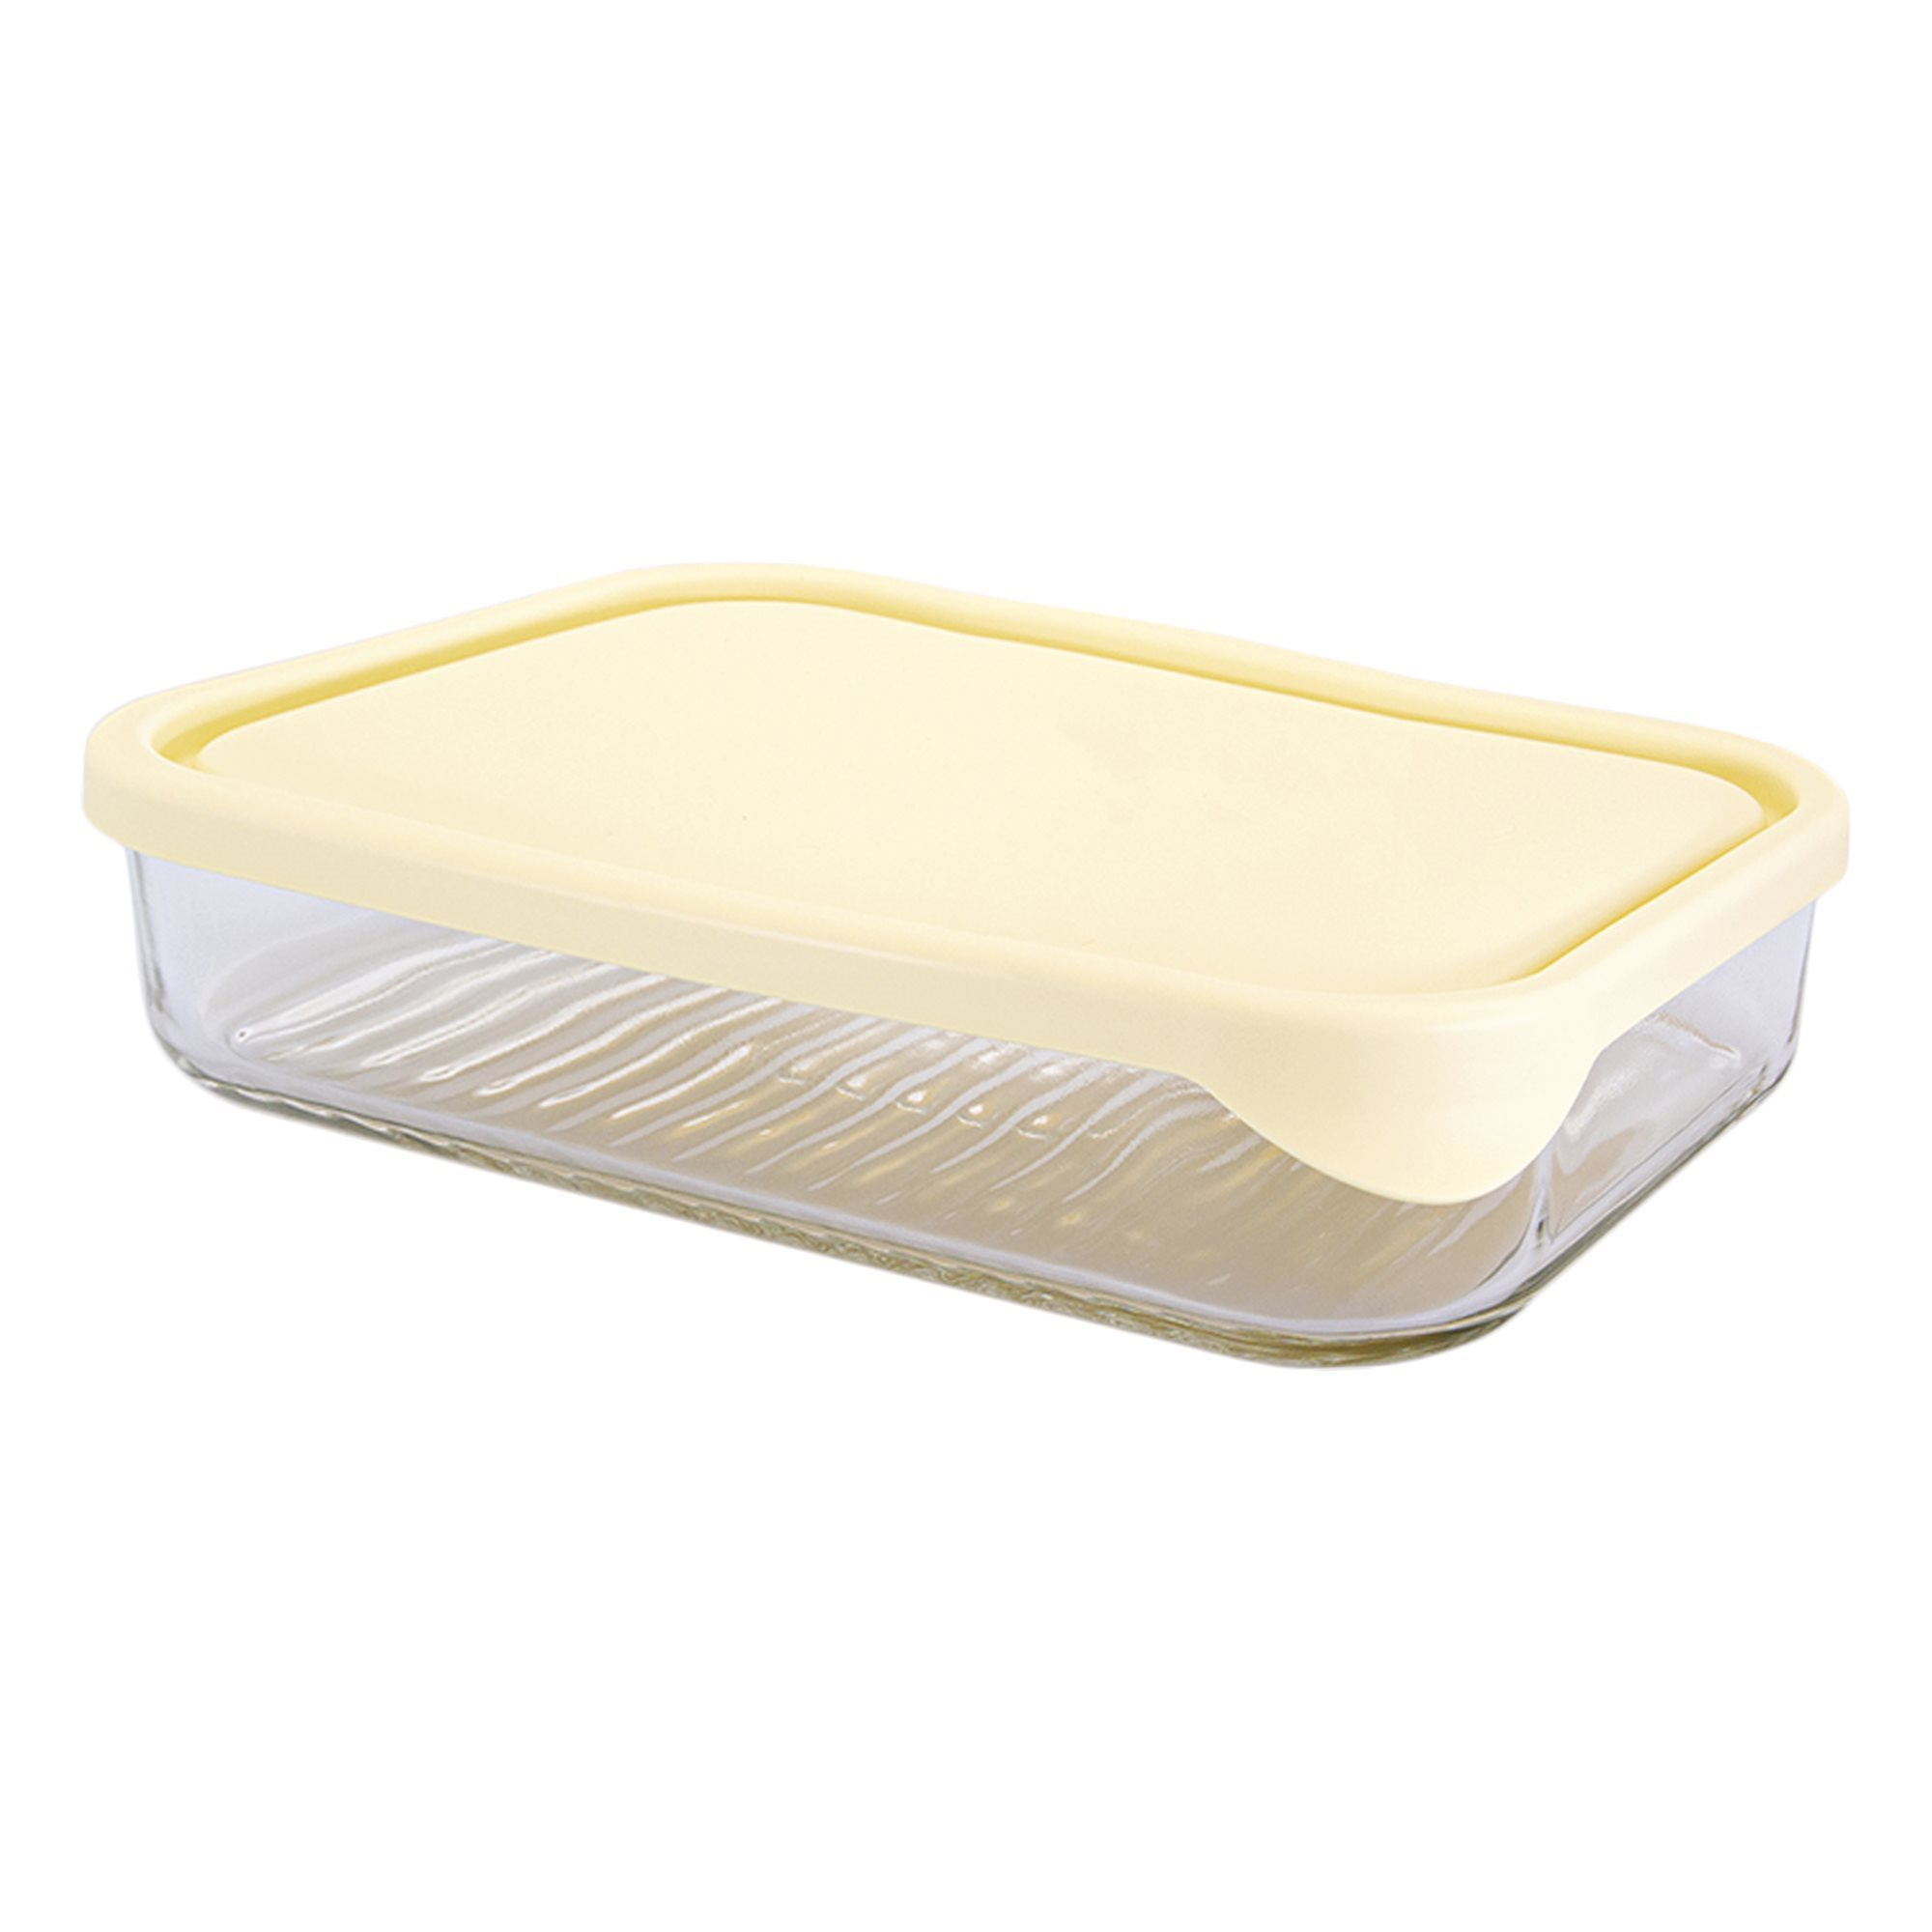 Rectangular food storage container, made from glass, with plastic